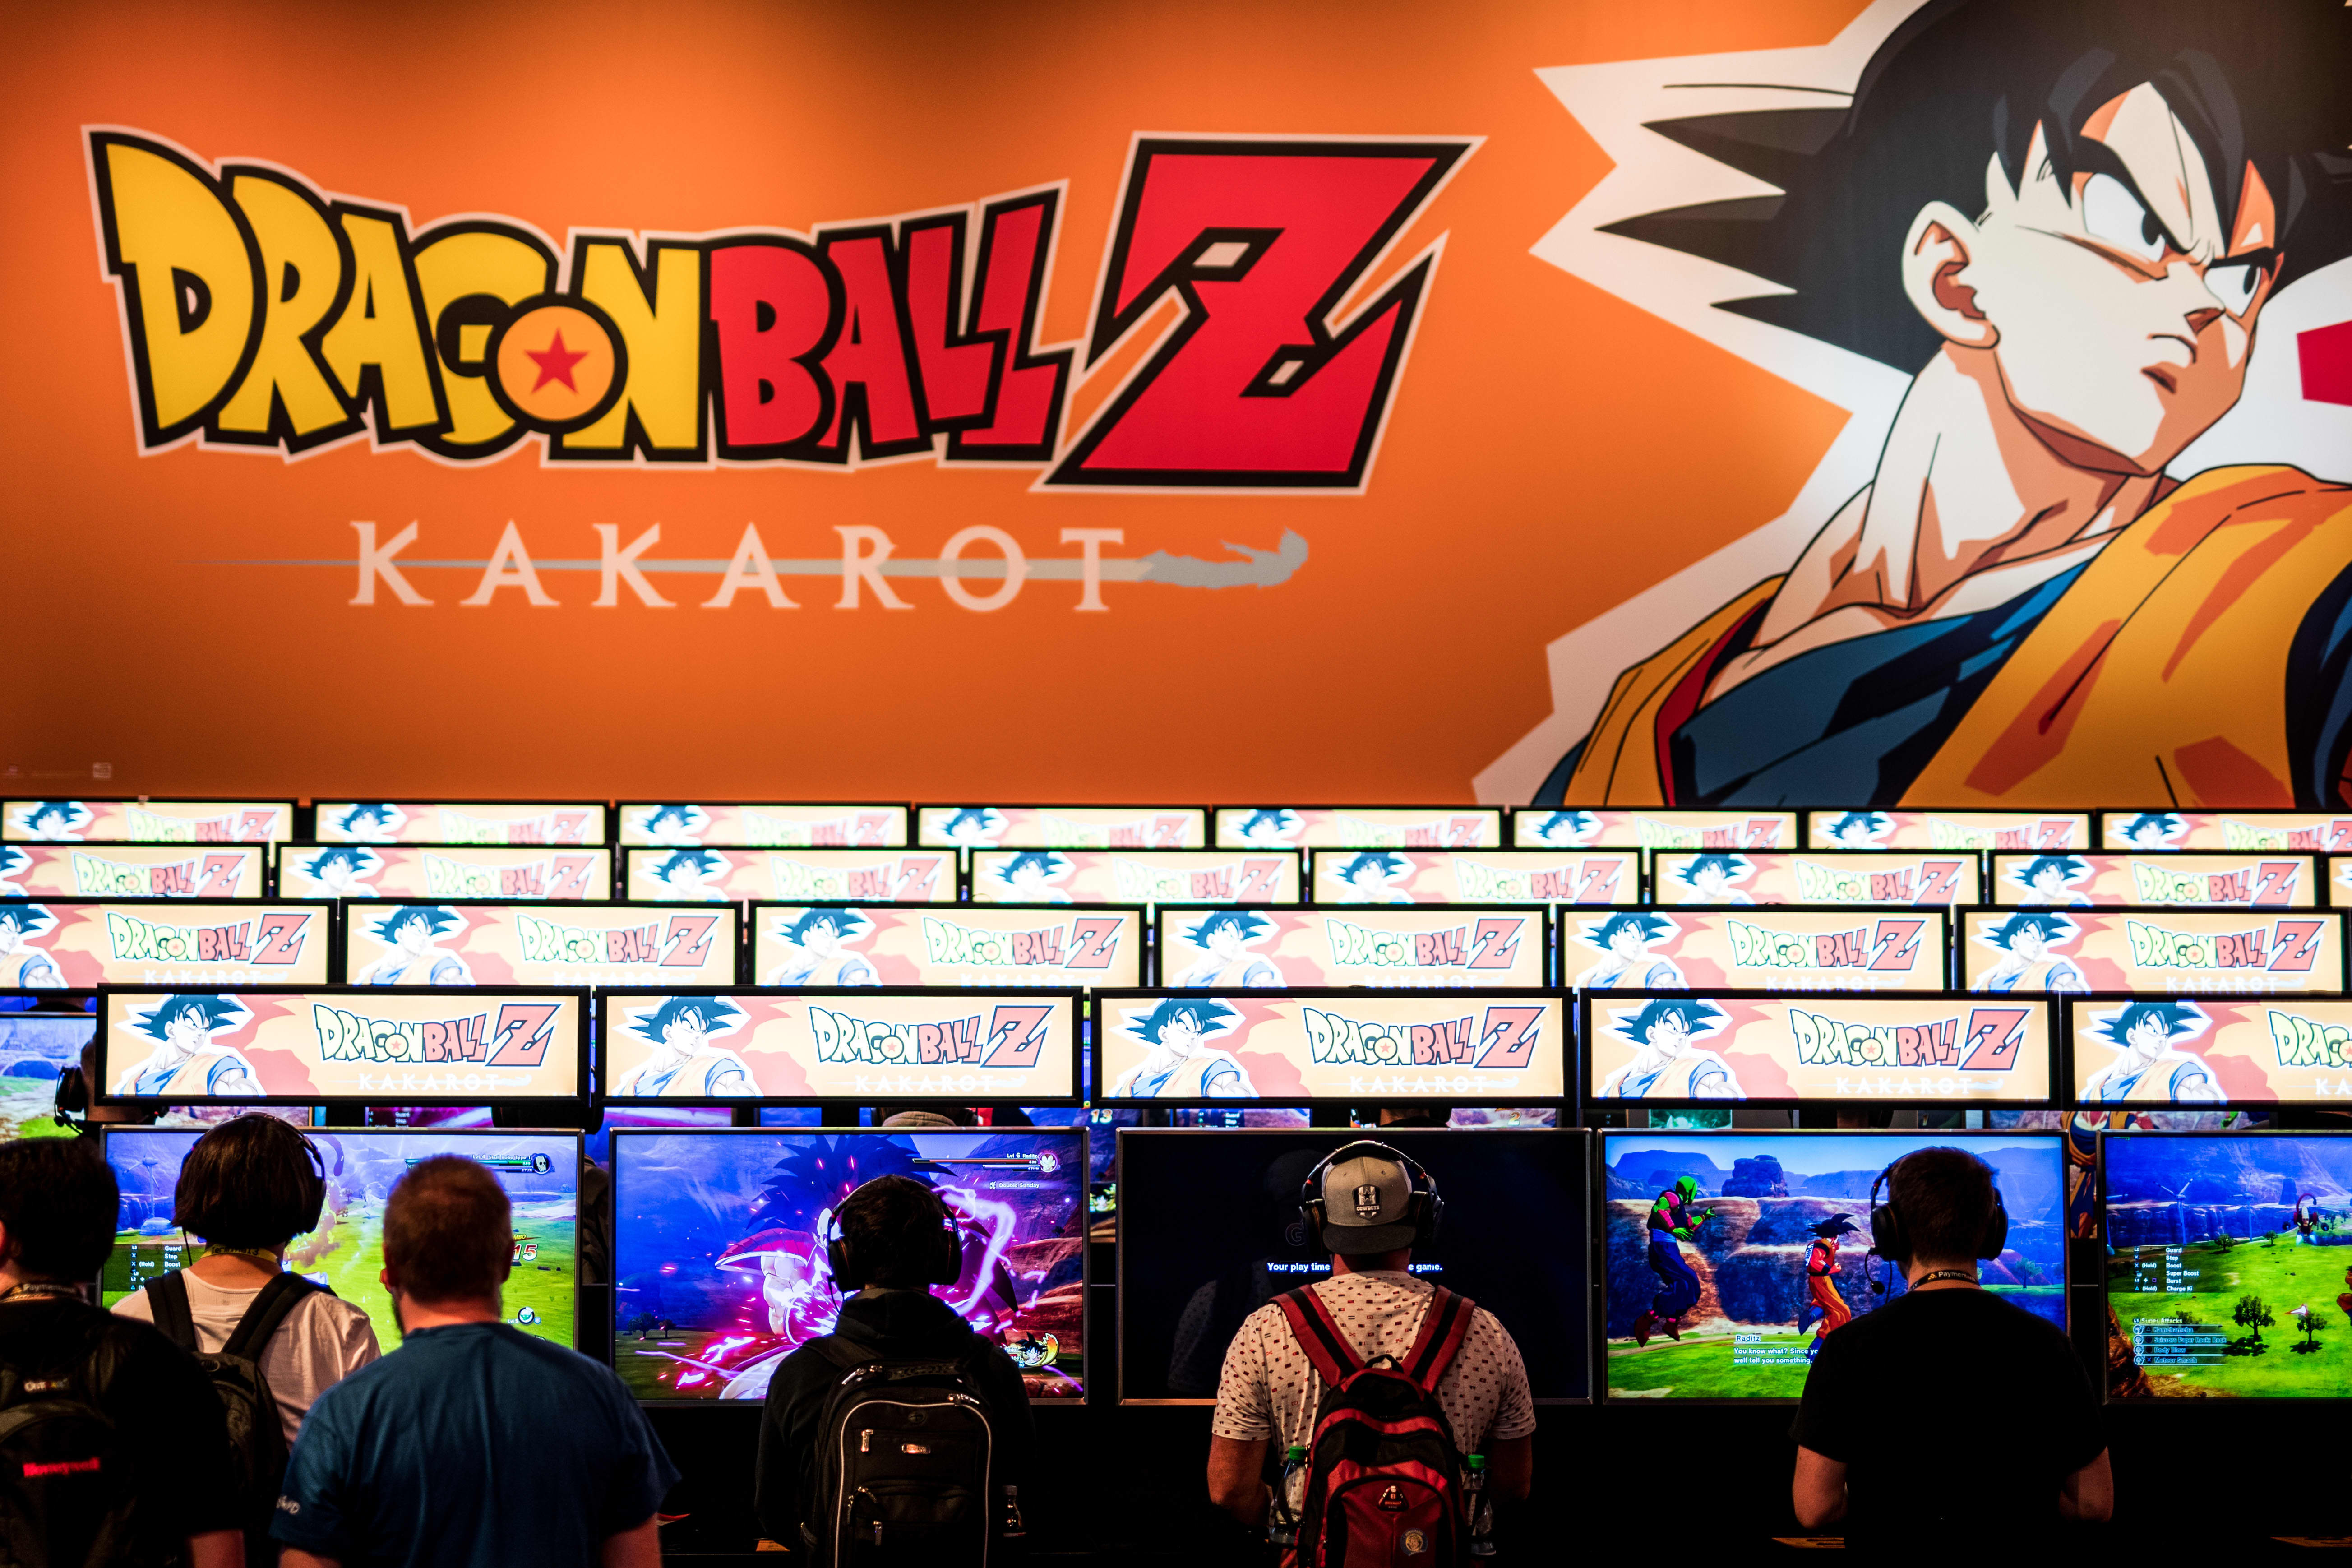 The world’s first Dragon Ball Z theme park is being constructed in Saudi Arabia.